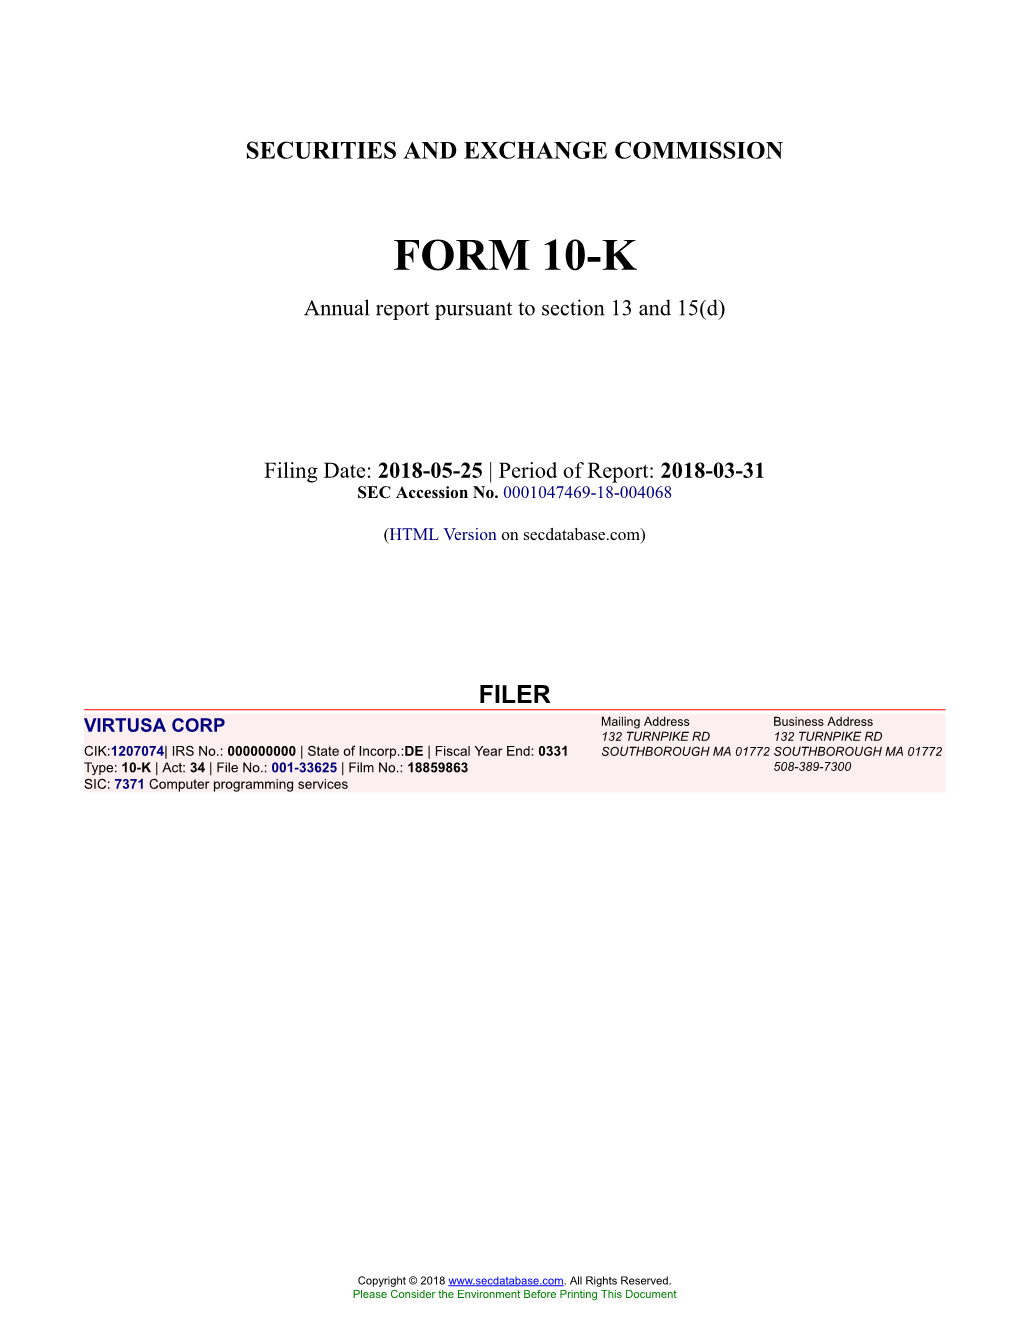 VIRTUSA CORP Form 10-K Annual Report Filed 2018-05-25